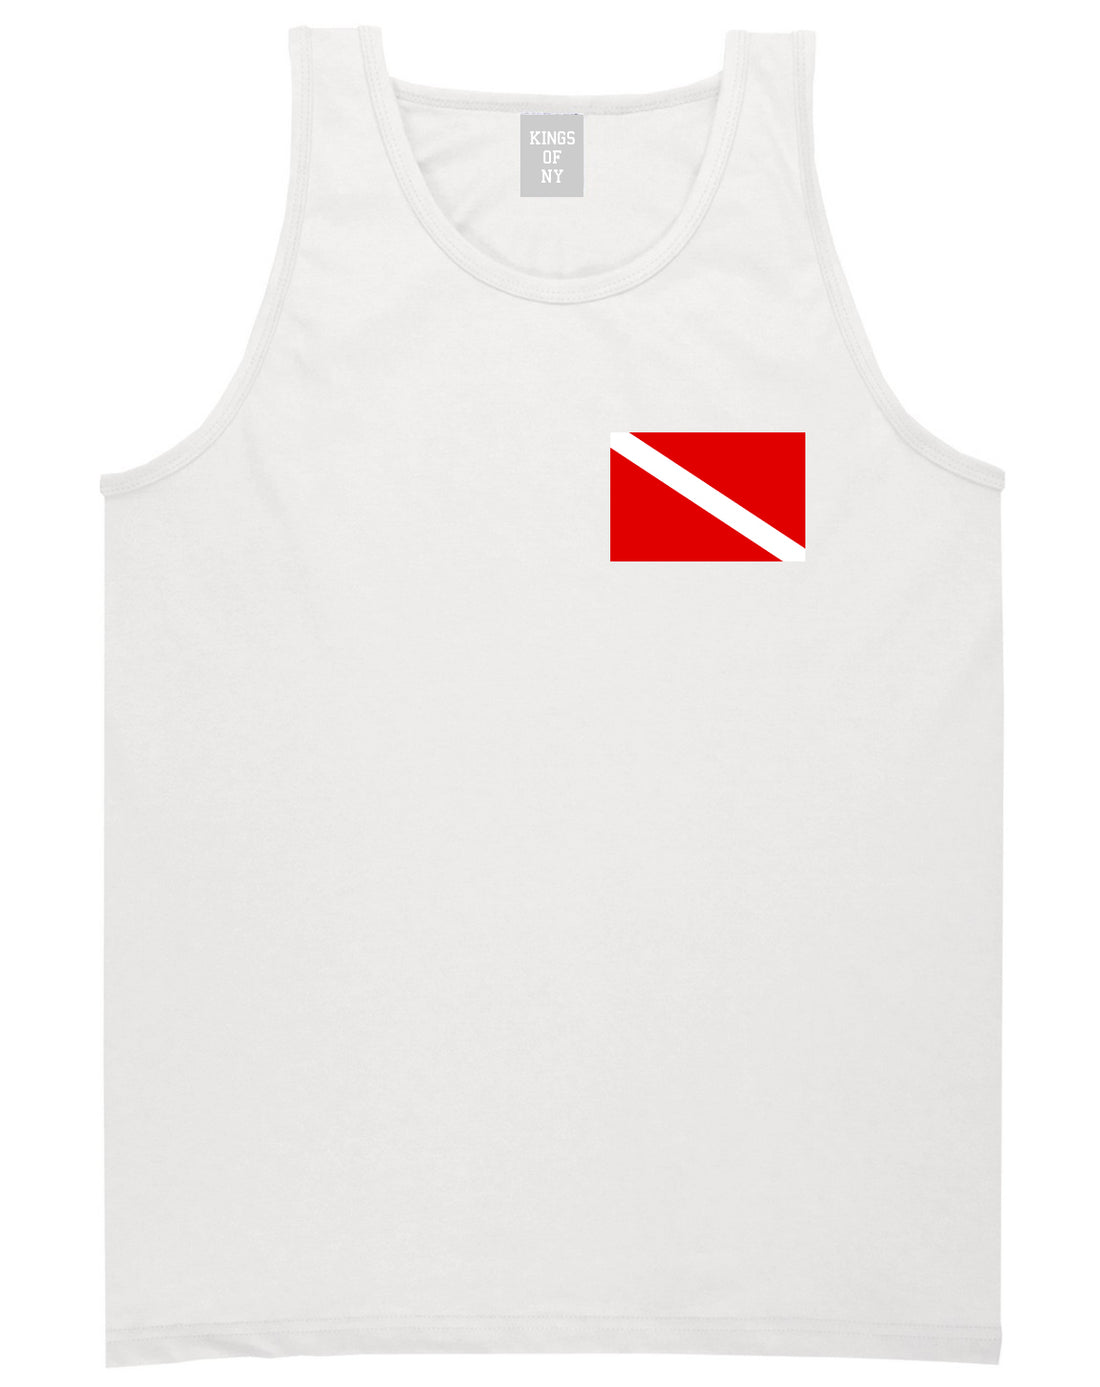 Scuba_Dive_Flag_Chest Mens White Tank Top Shirt by Kings Of NY